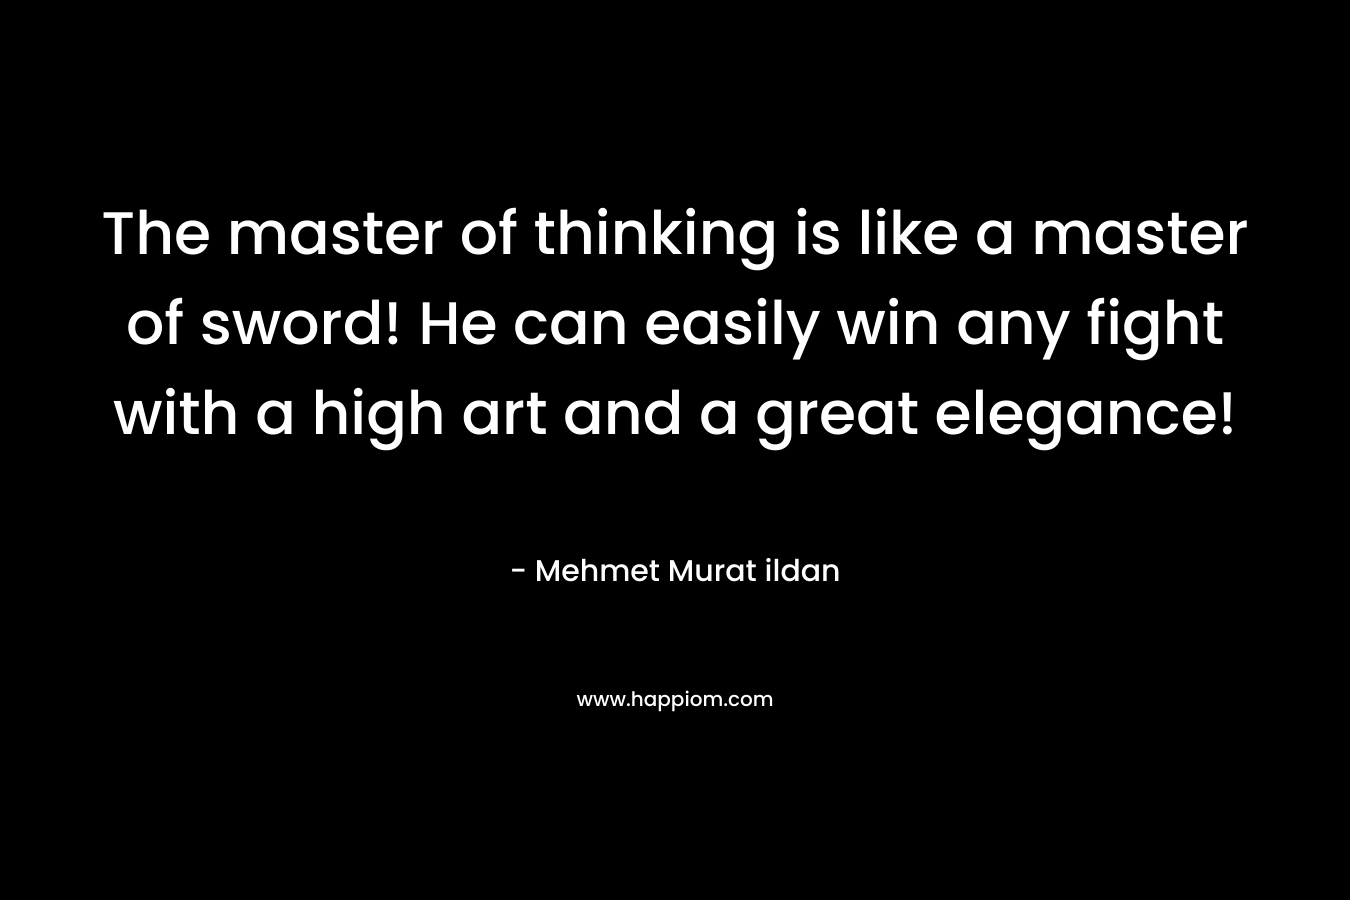 The master of thinking is like a master of sword! He can easily win any fight with a high art and a great elegance! – Mehmet Murat ildan